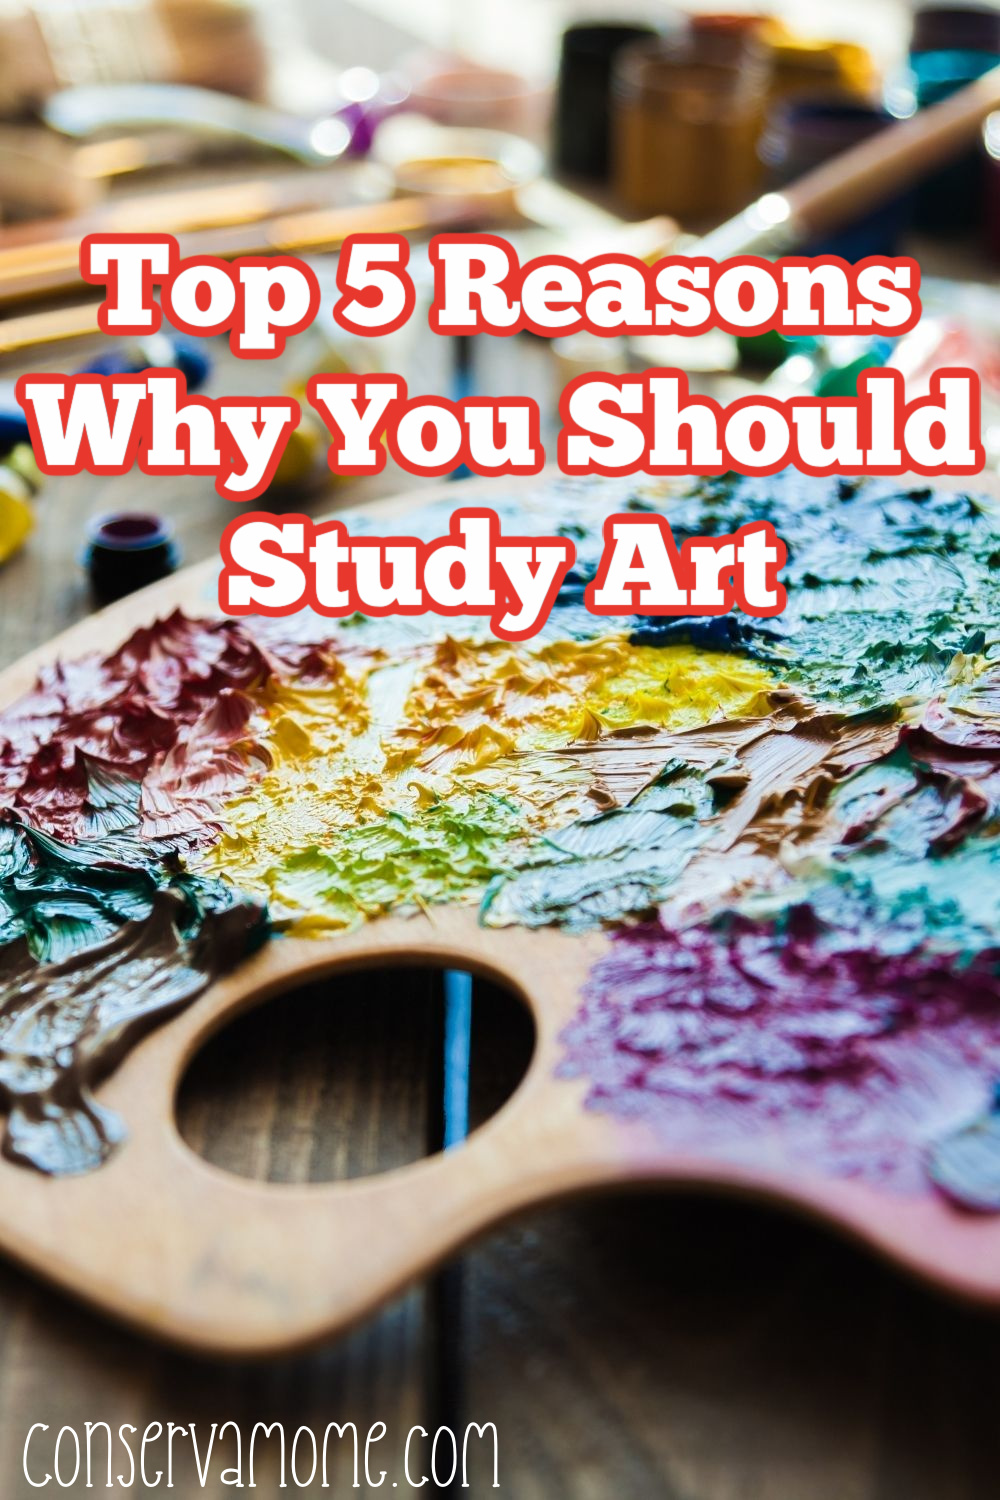 Top 5 Reasons why you should study art